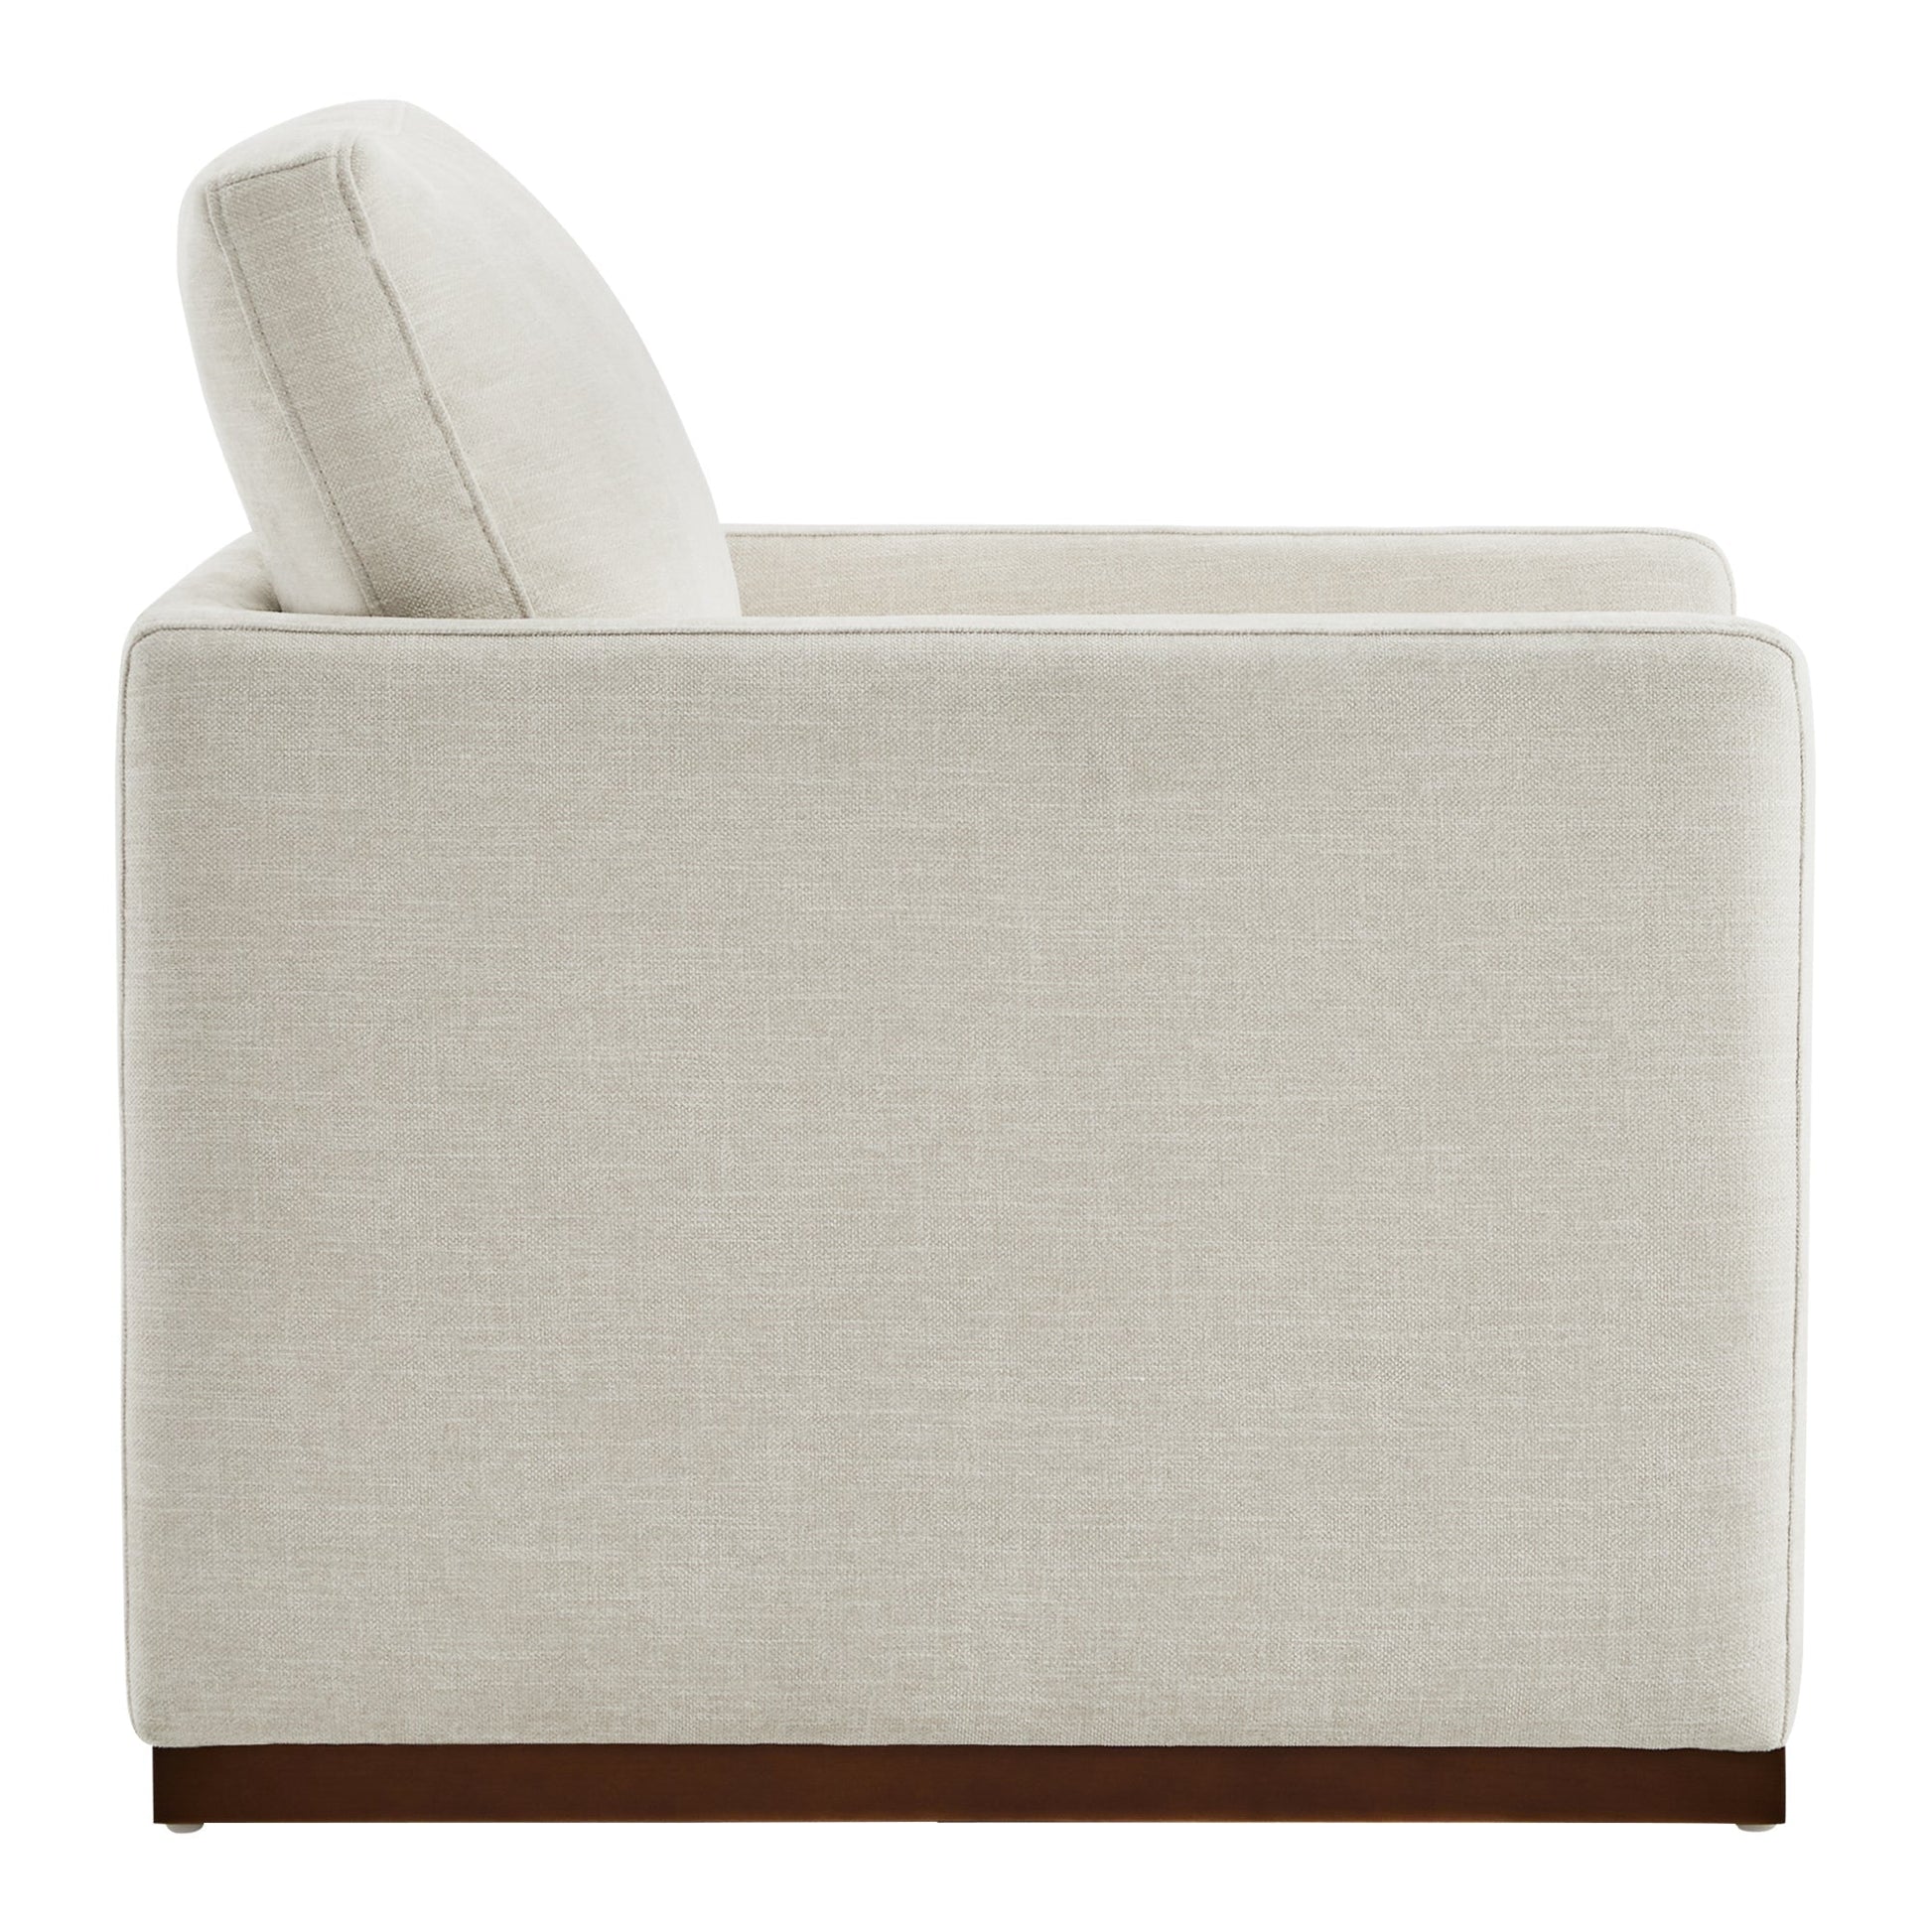 CHITA LIVING-Henry Swivel Accent Chair-Accent Chair-Fabric-Linen-